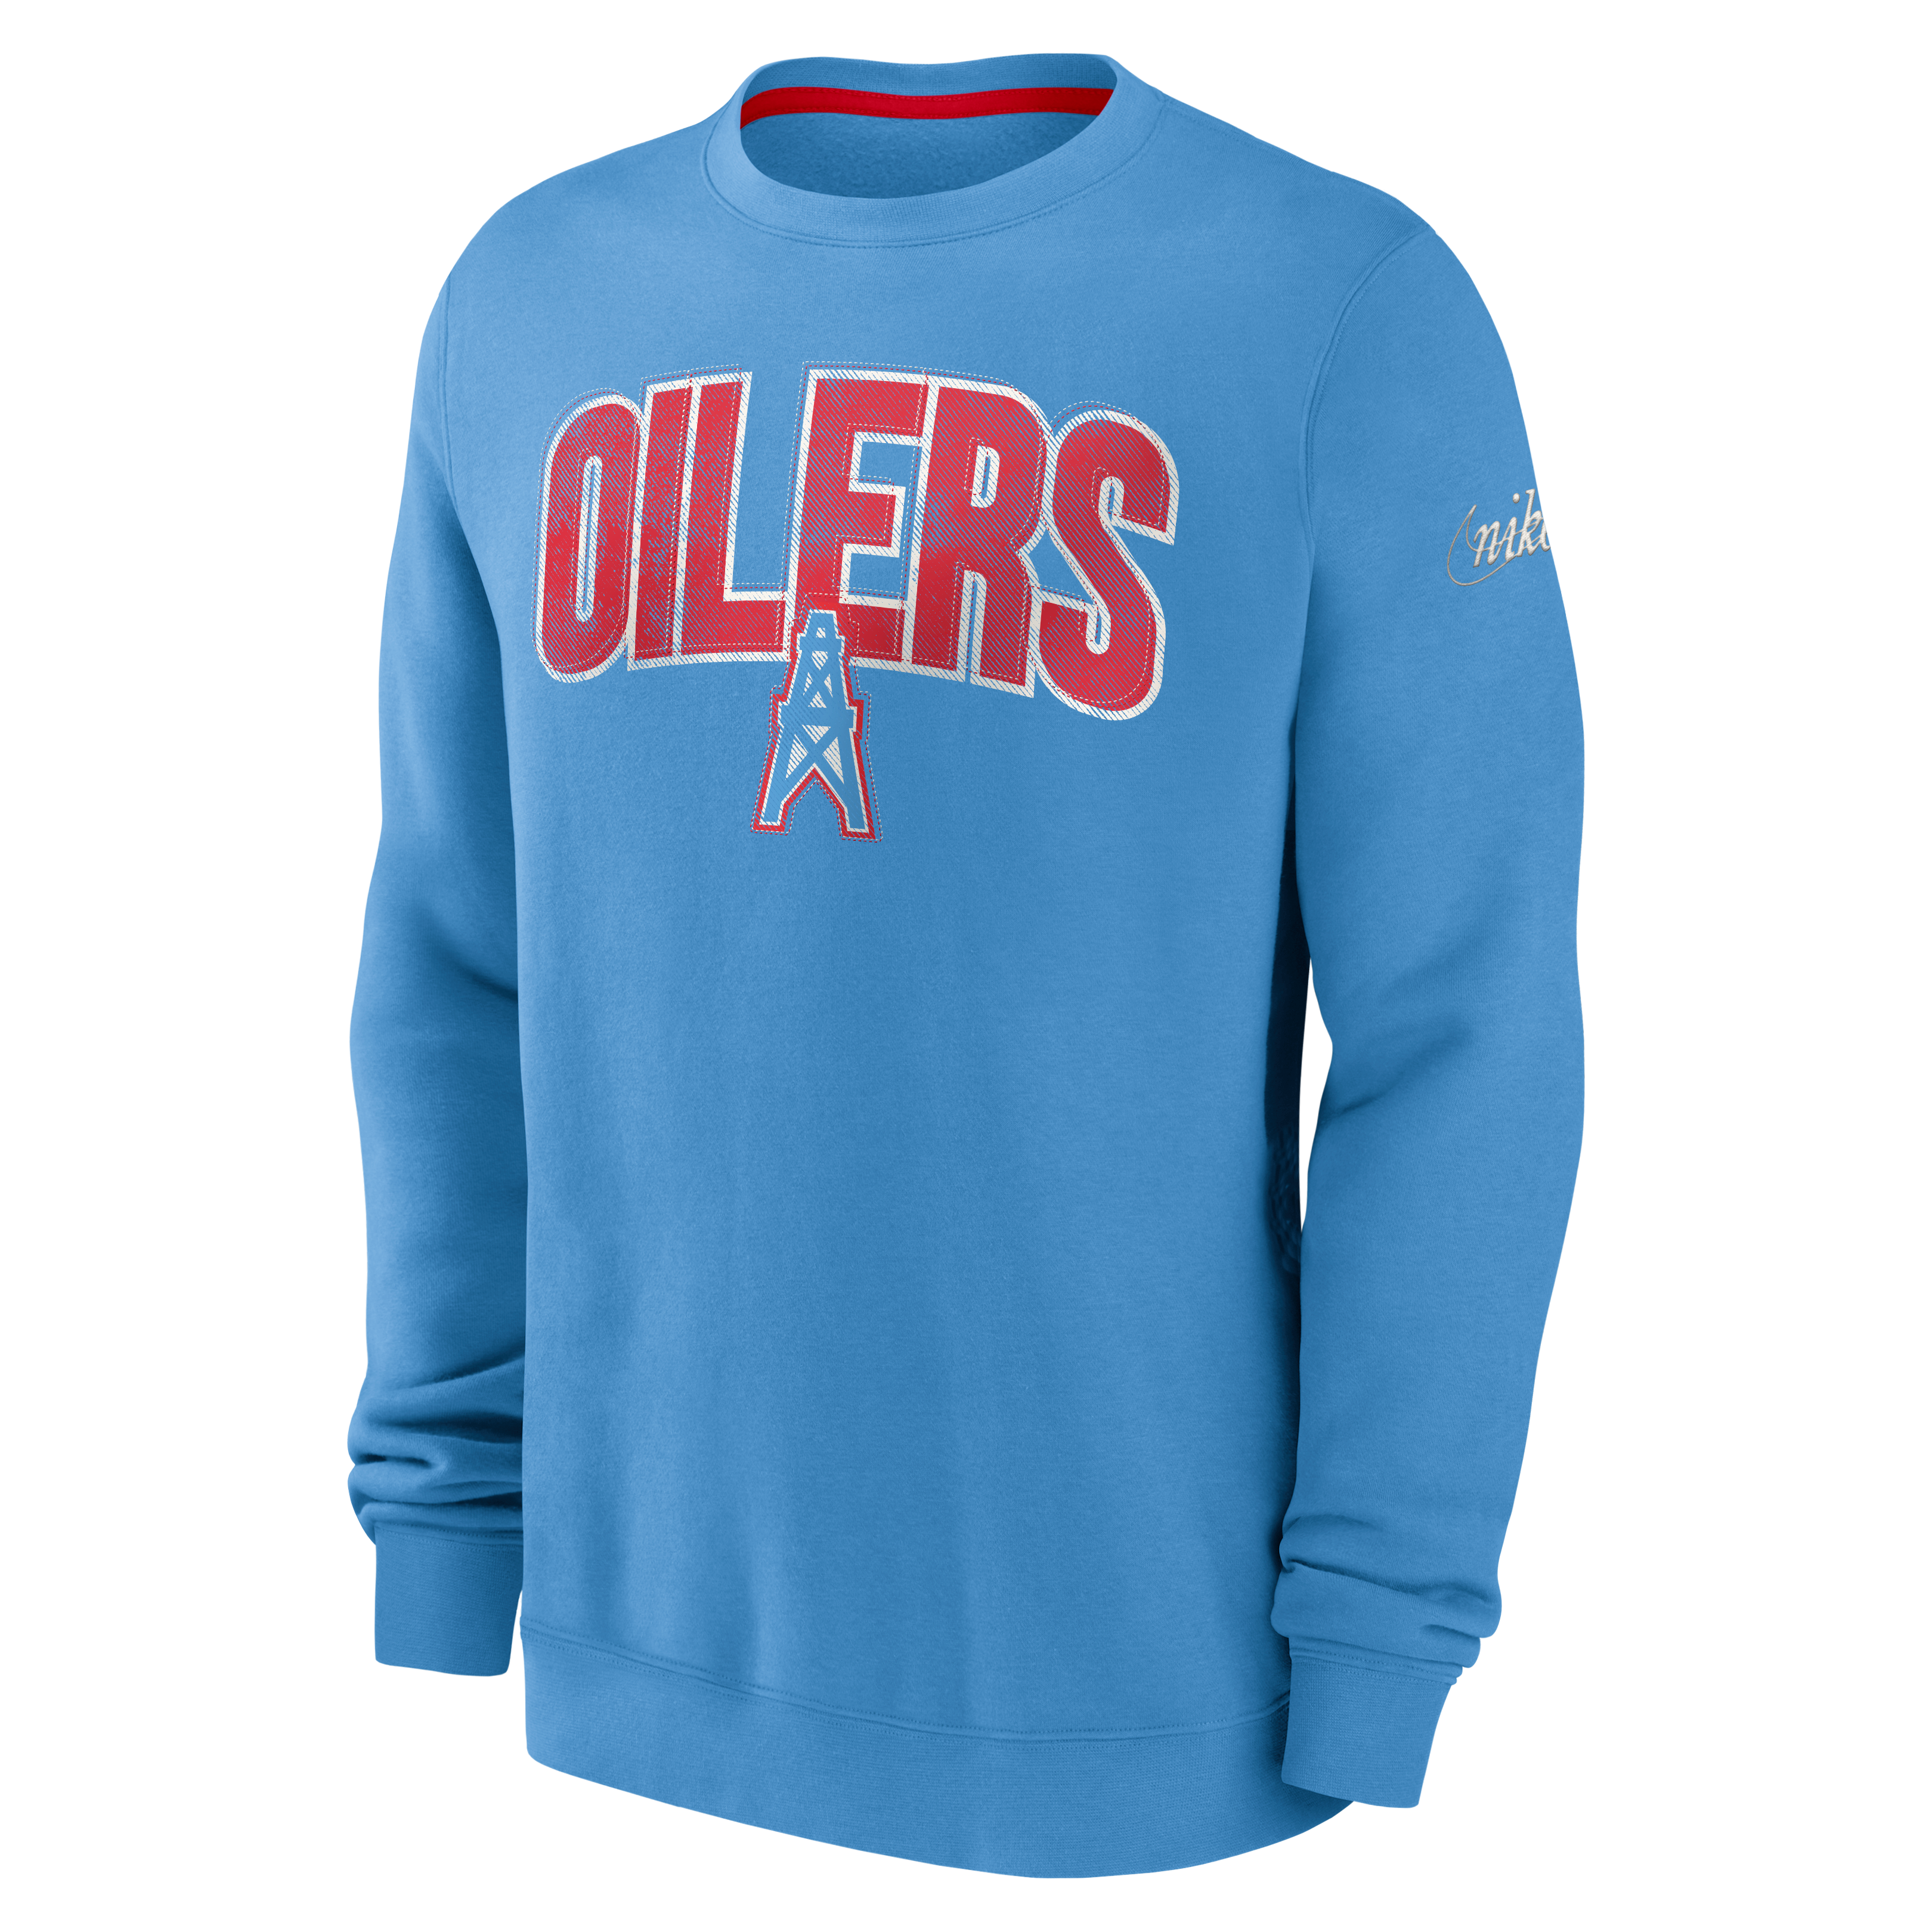 Vintage Houston Oilers 3/4 Sleeve T-shirt Size L Made in USA